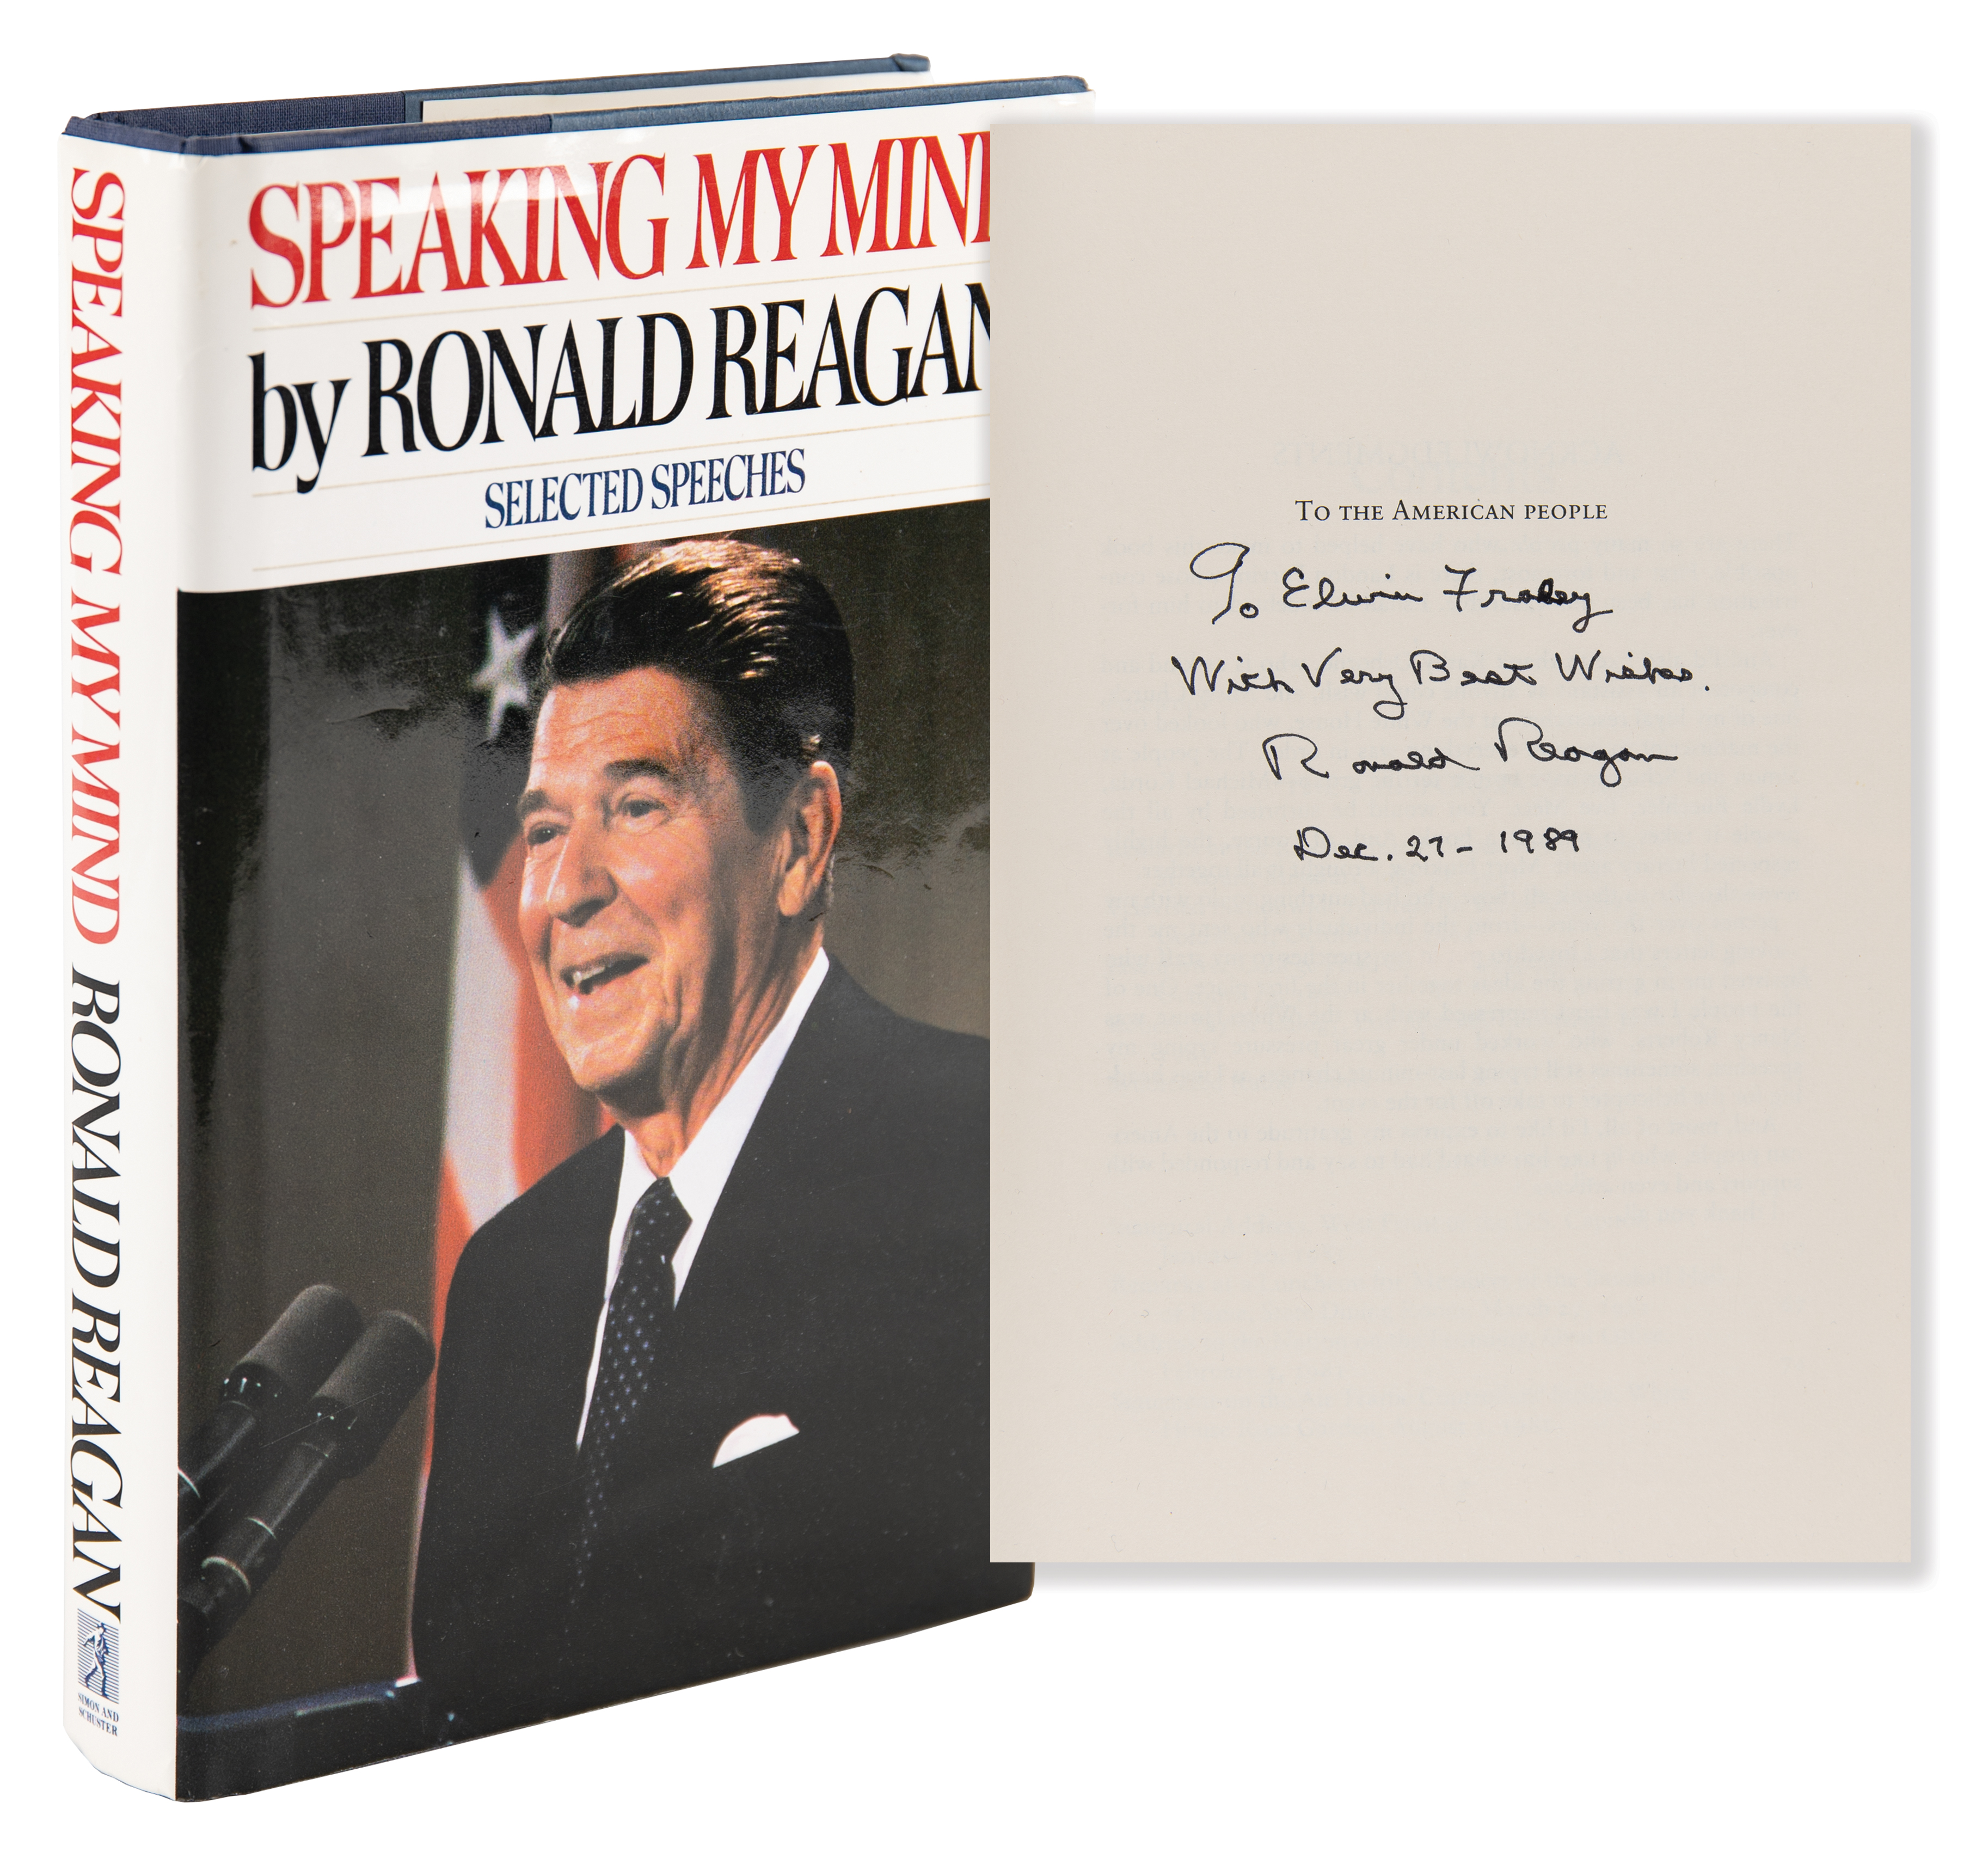 Lot #105 Ronald Reagan Signed Book - Speaking My